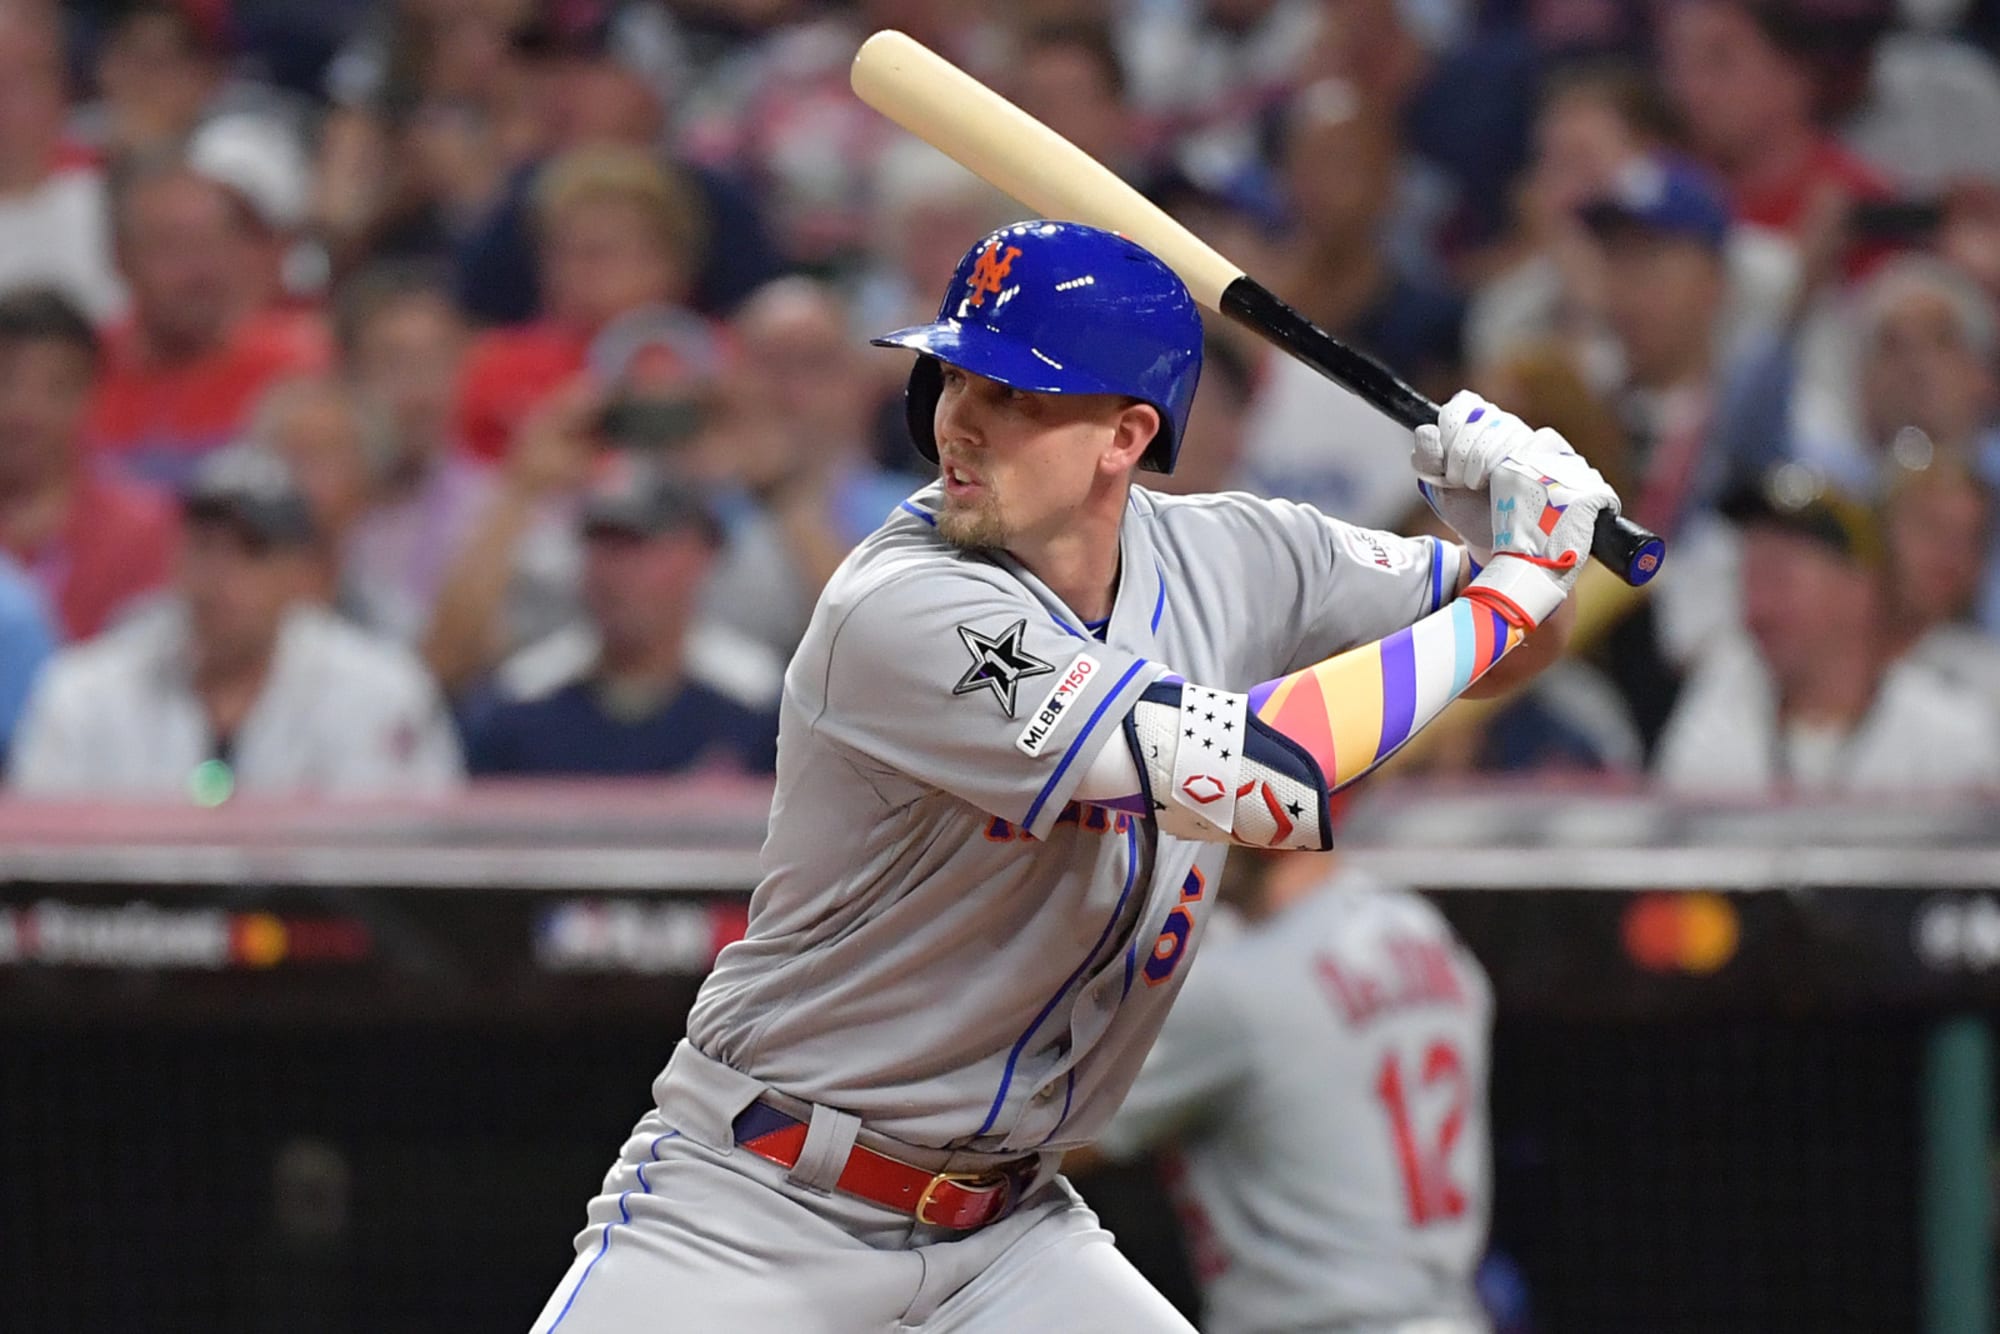 New York Mets: Jeff McNeil trying to become 2nd baseman of the future